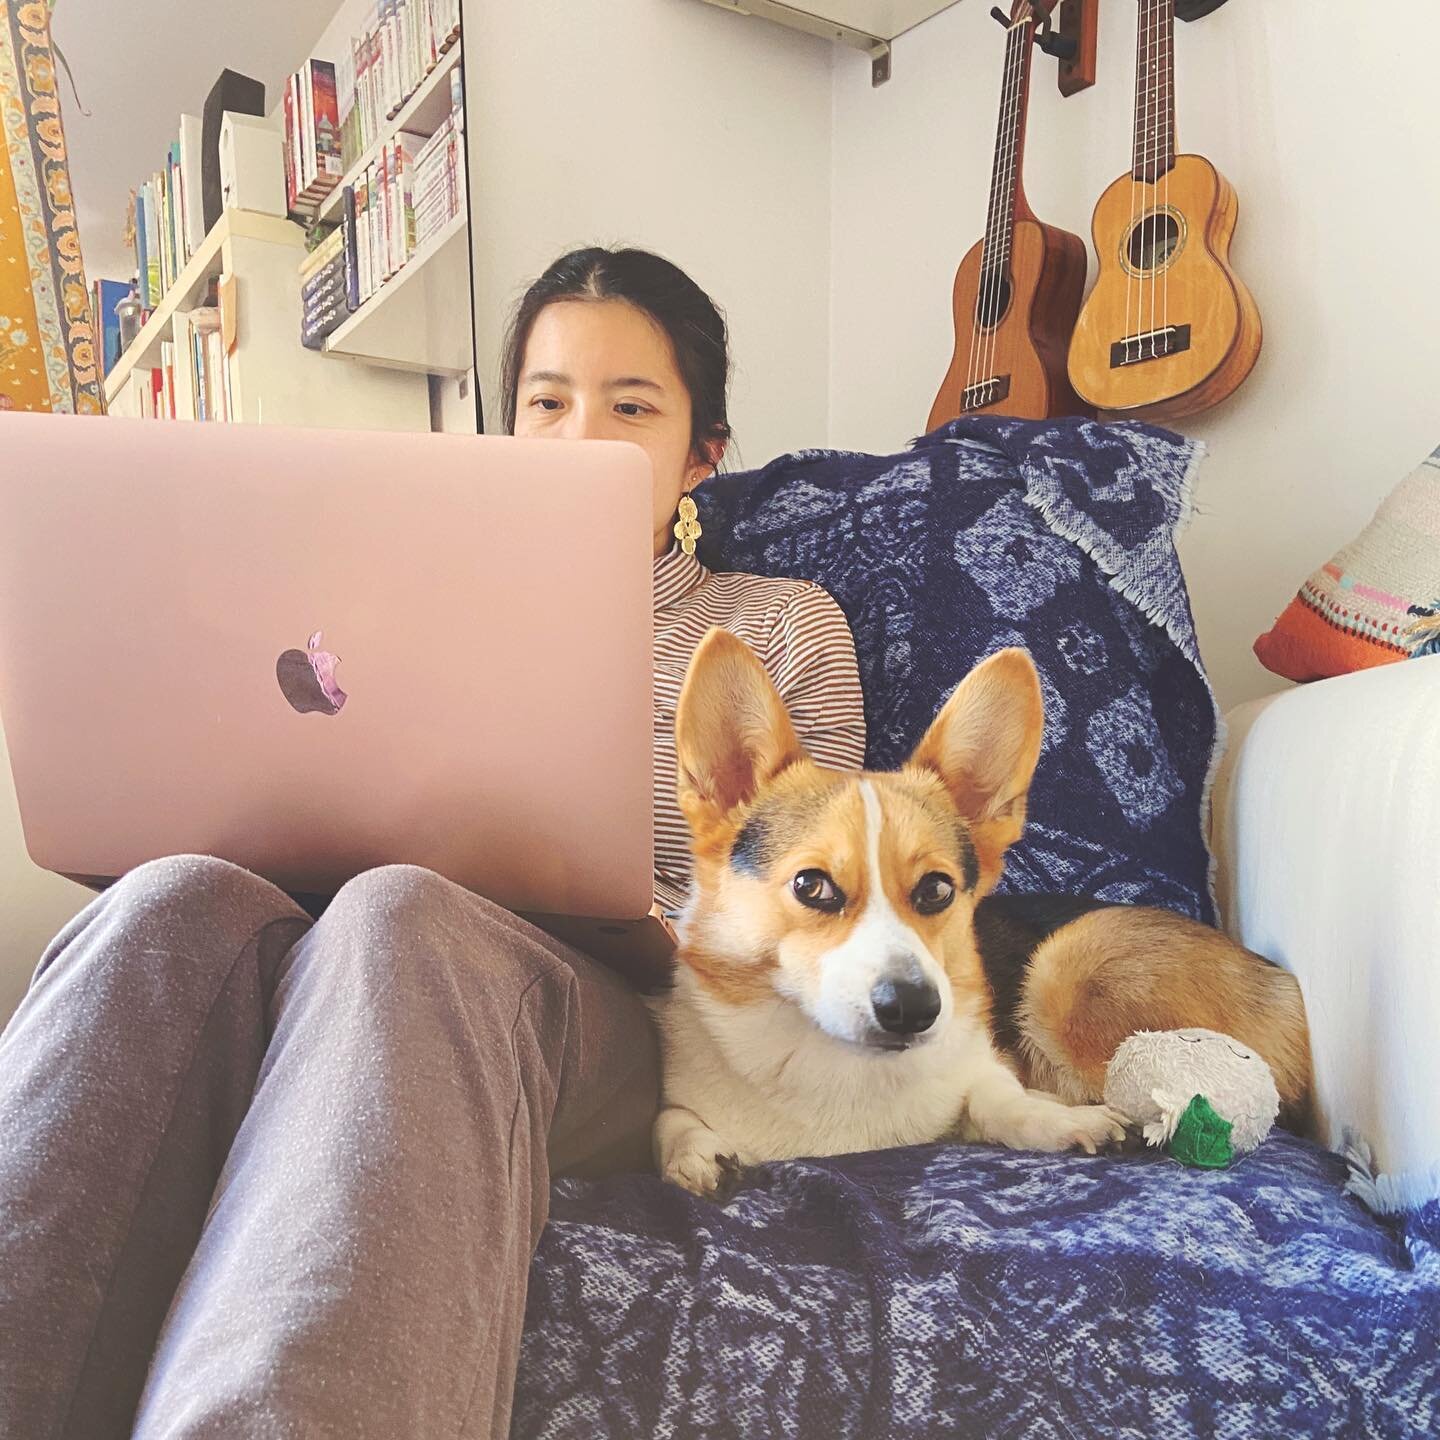 The writer and her dog in their natural habitat, aka the writer is drafting a new book and doesn&rsquo;t move from this armchair  for hours at a time while her dog patiently awaits the next snack break. 💕 Thanks for the photo, @kaela.the.violin.kid 